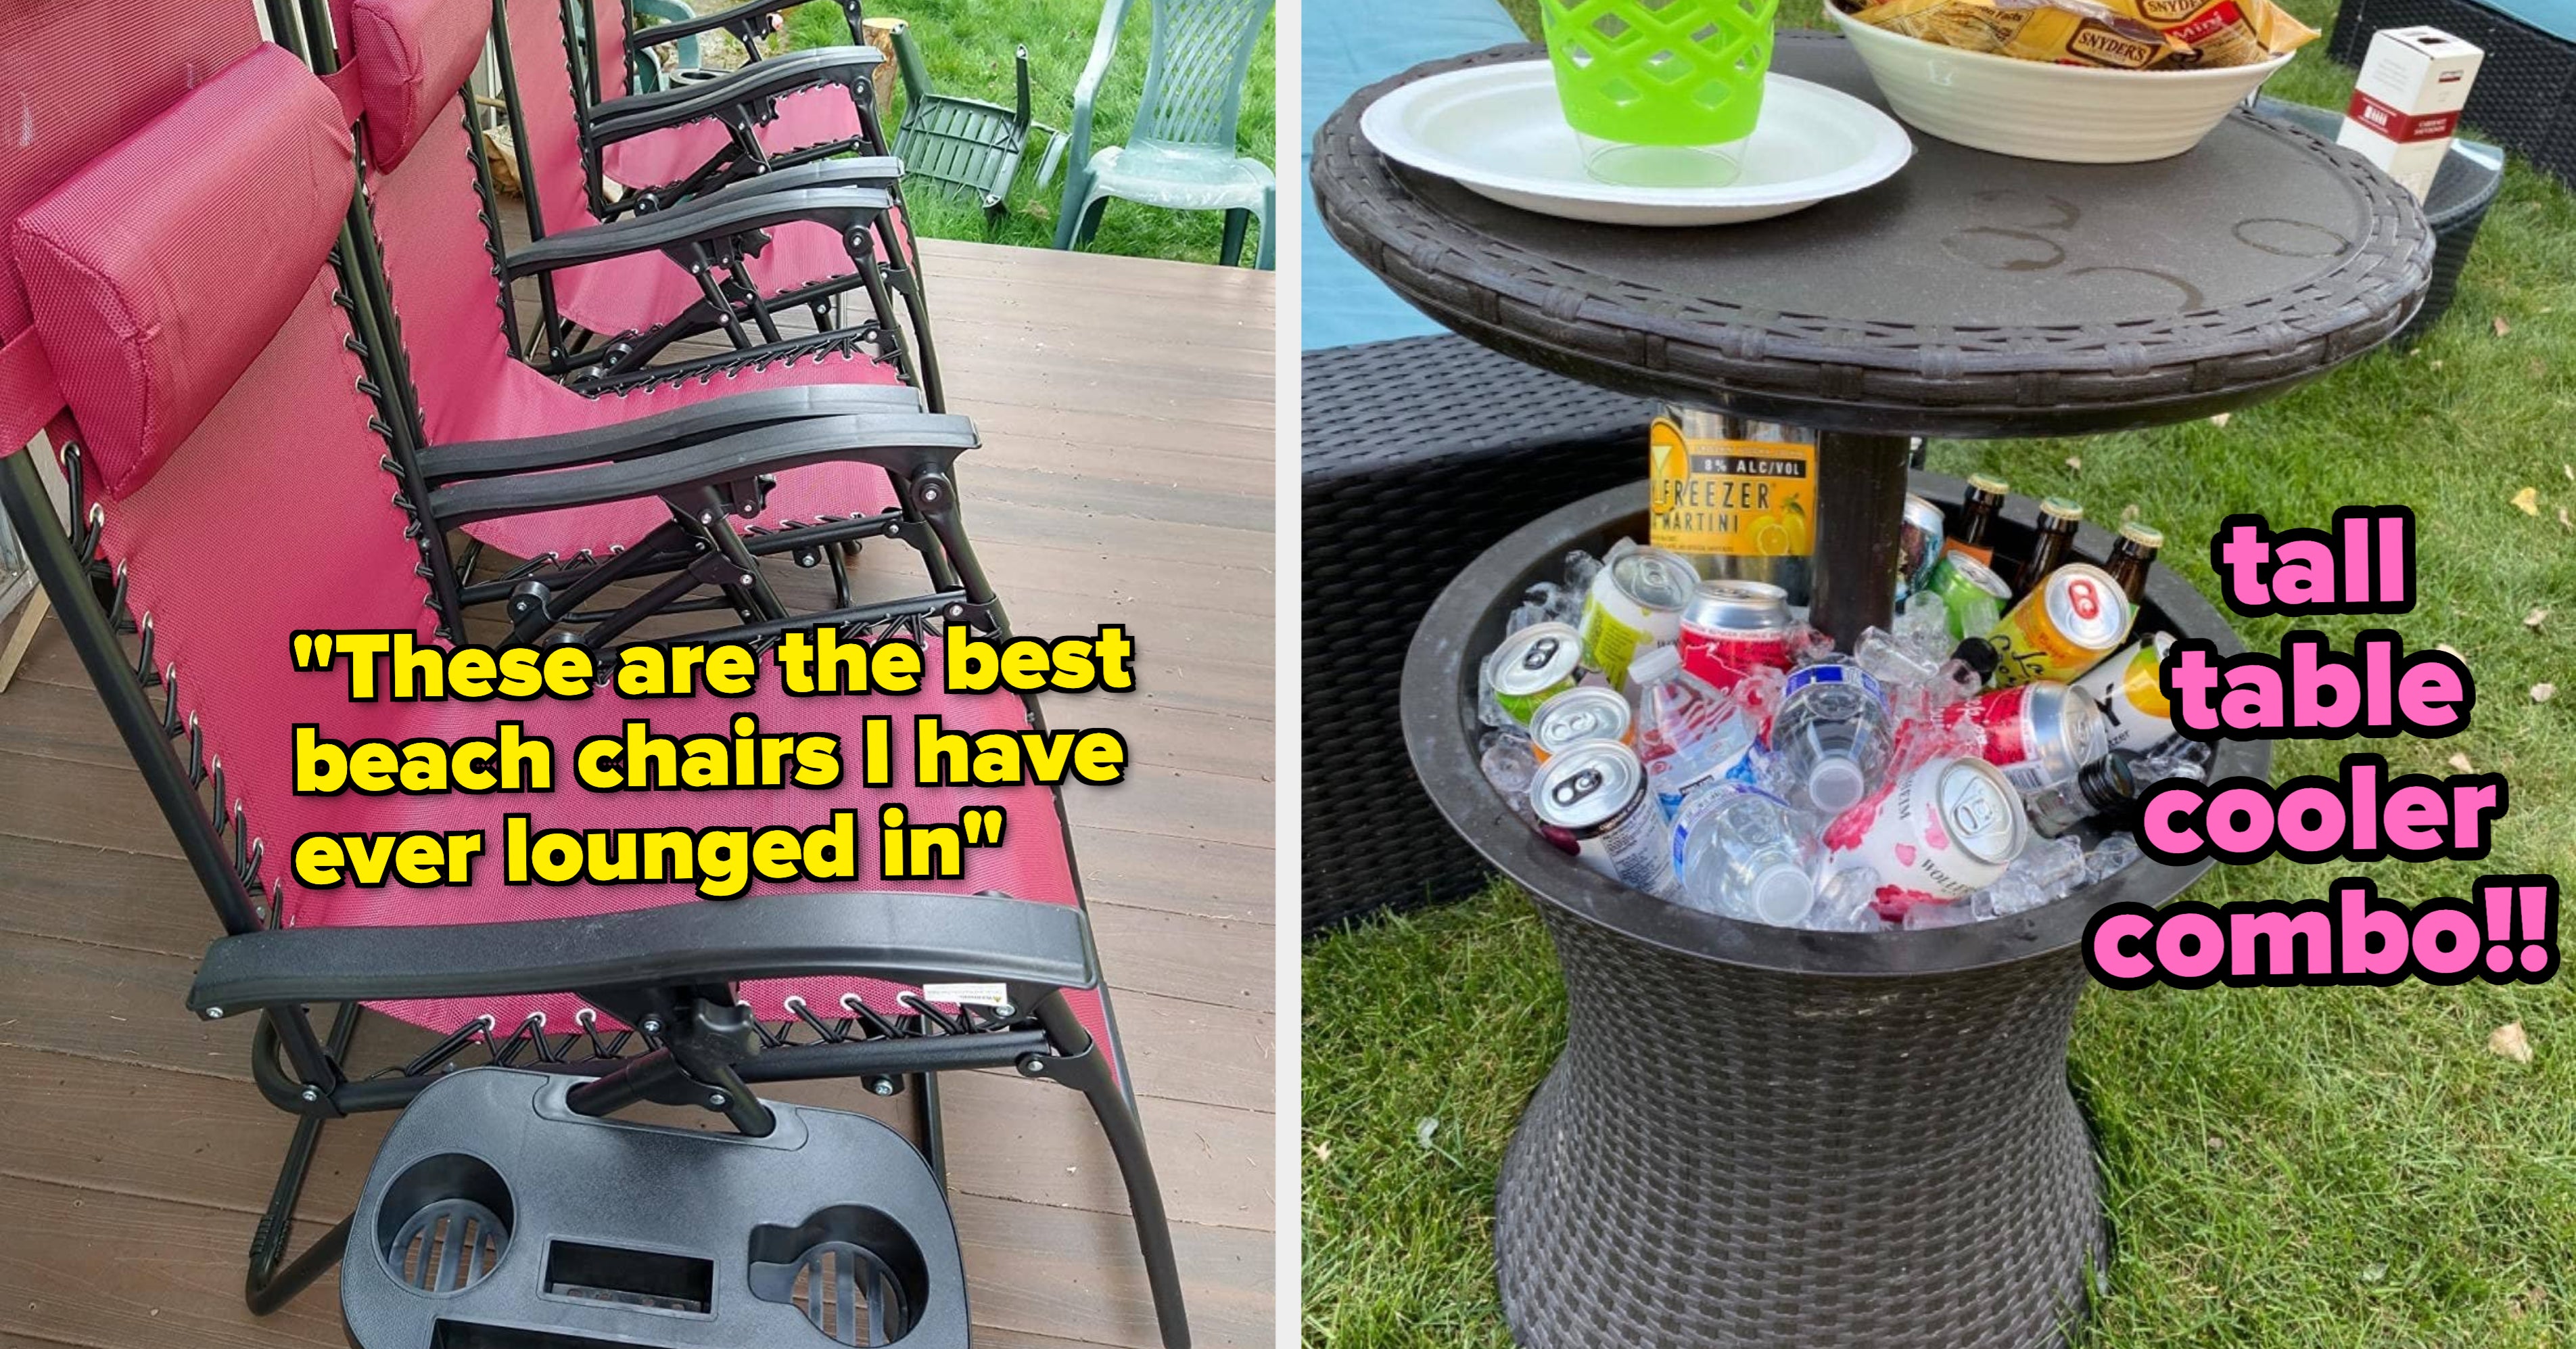 48 Things To Make All Of Your Backyard Dreams Come True